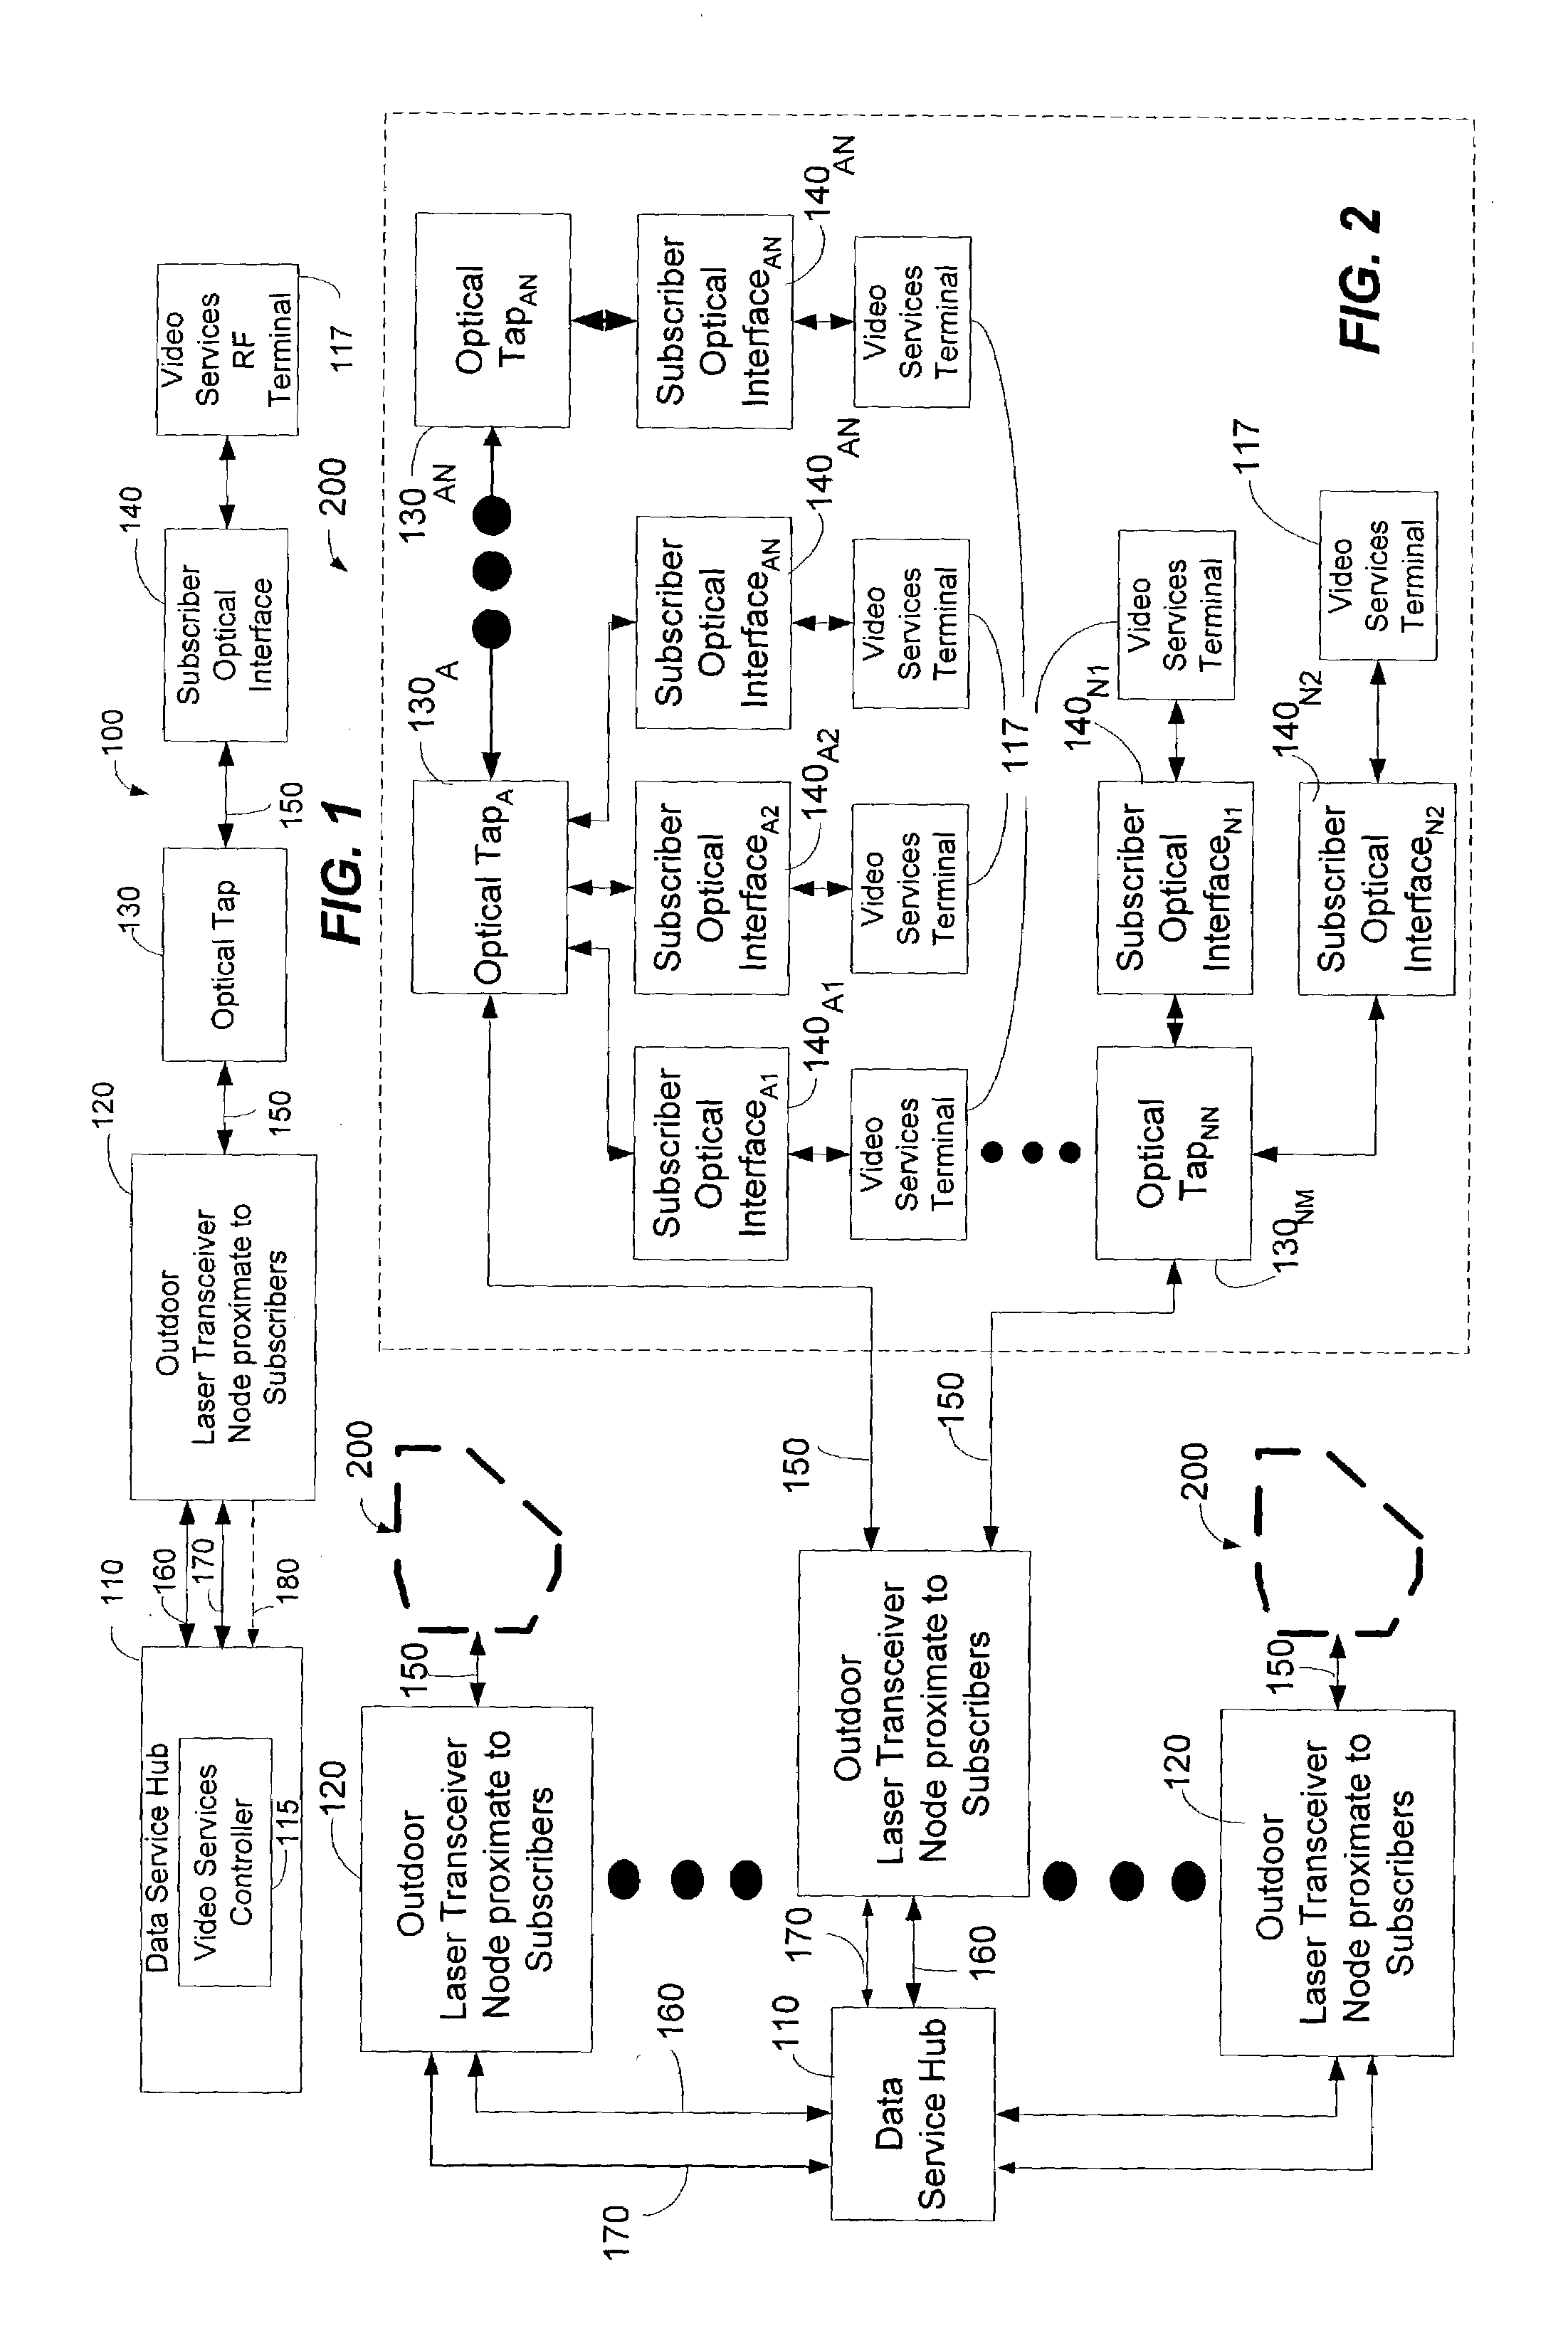 Method and system for providing a return path for signals generated by legacy terminals in an optical network